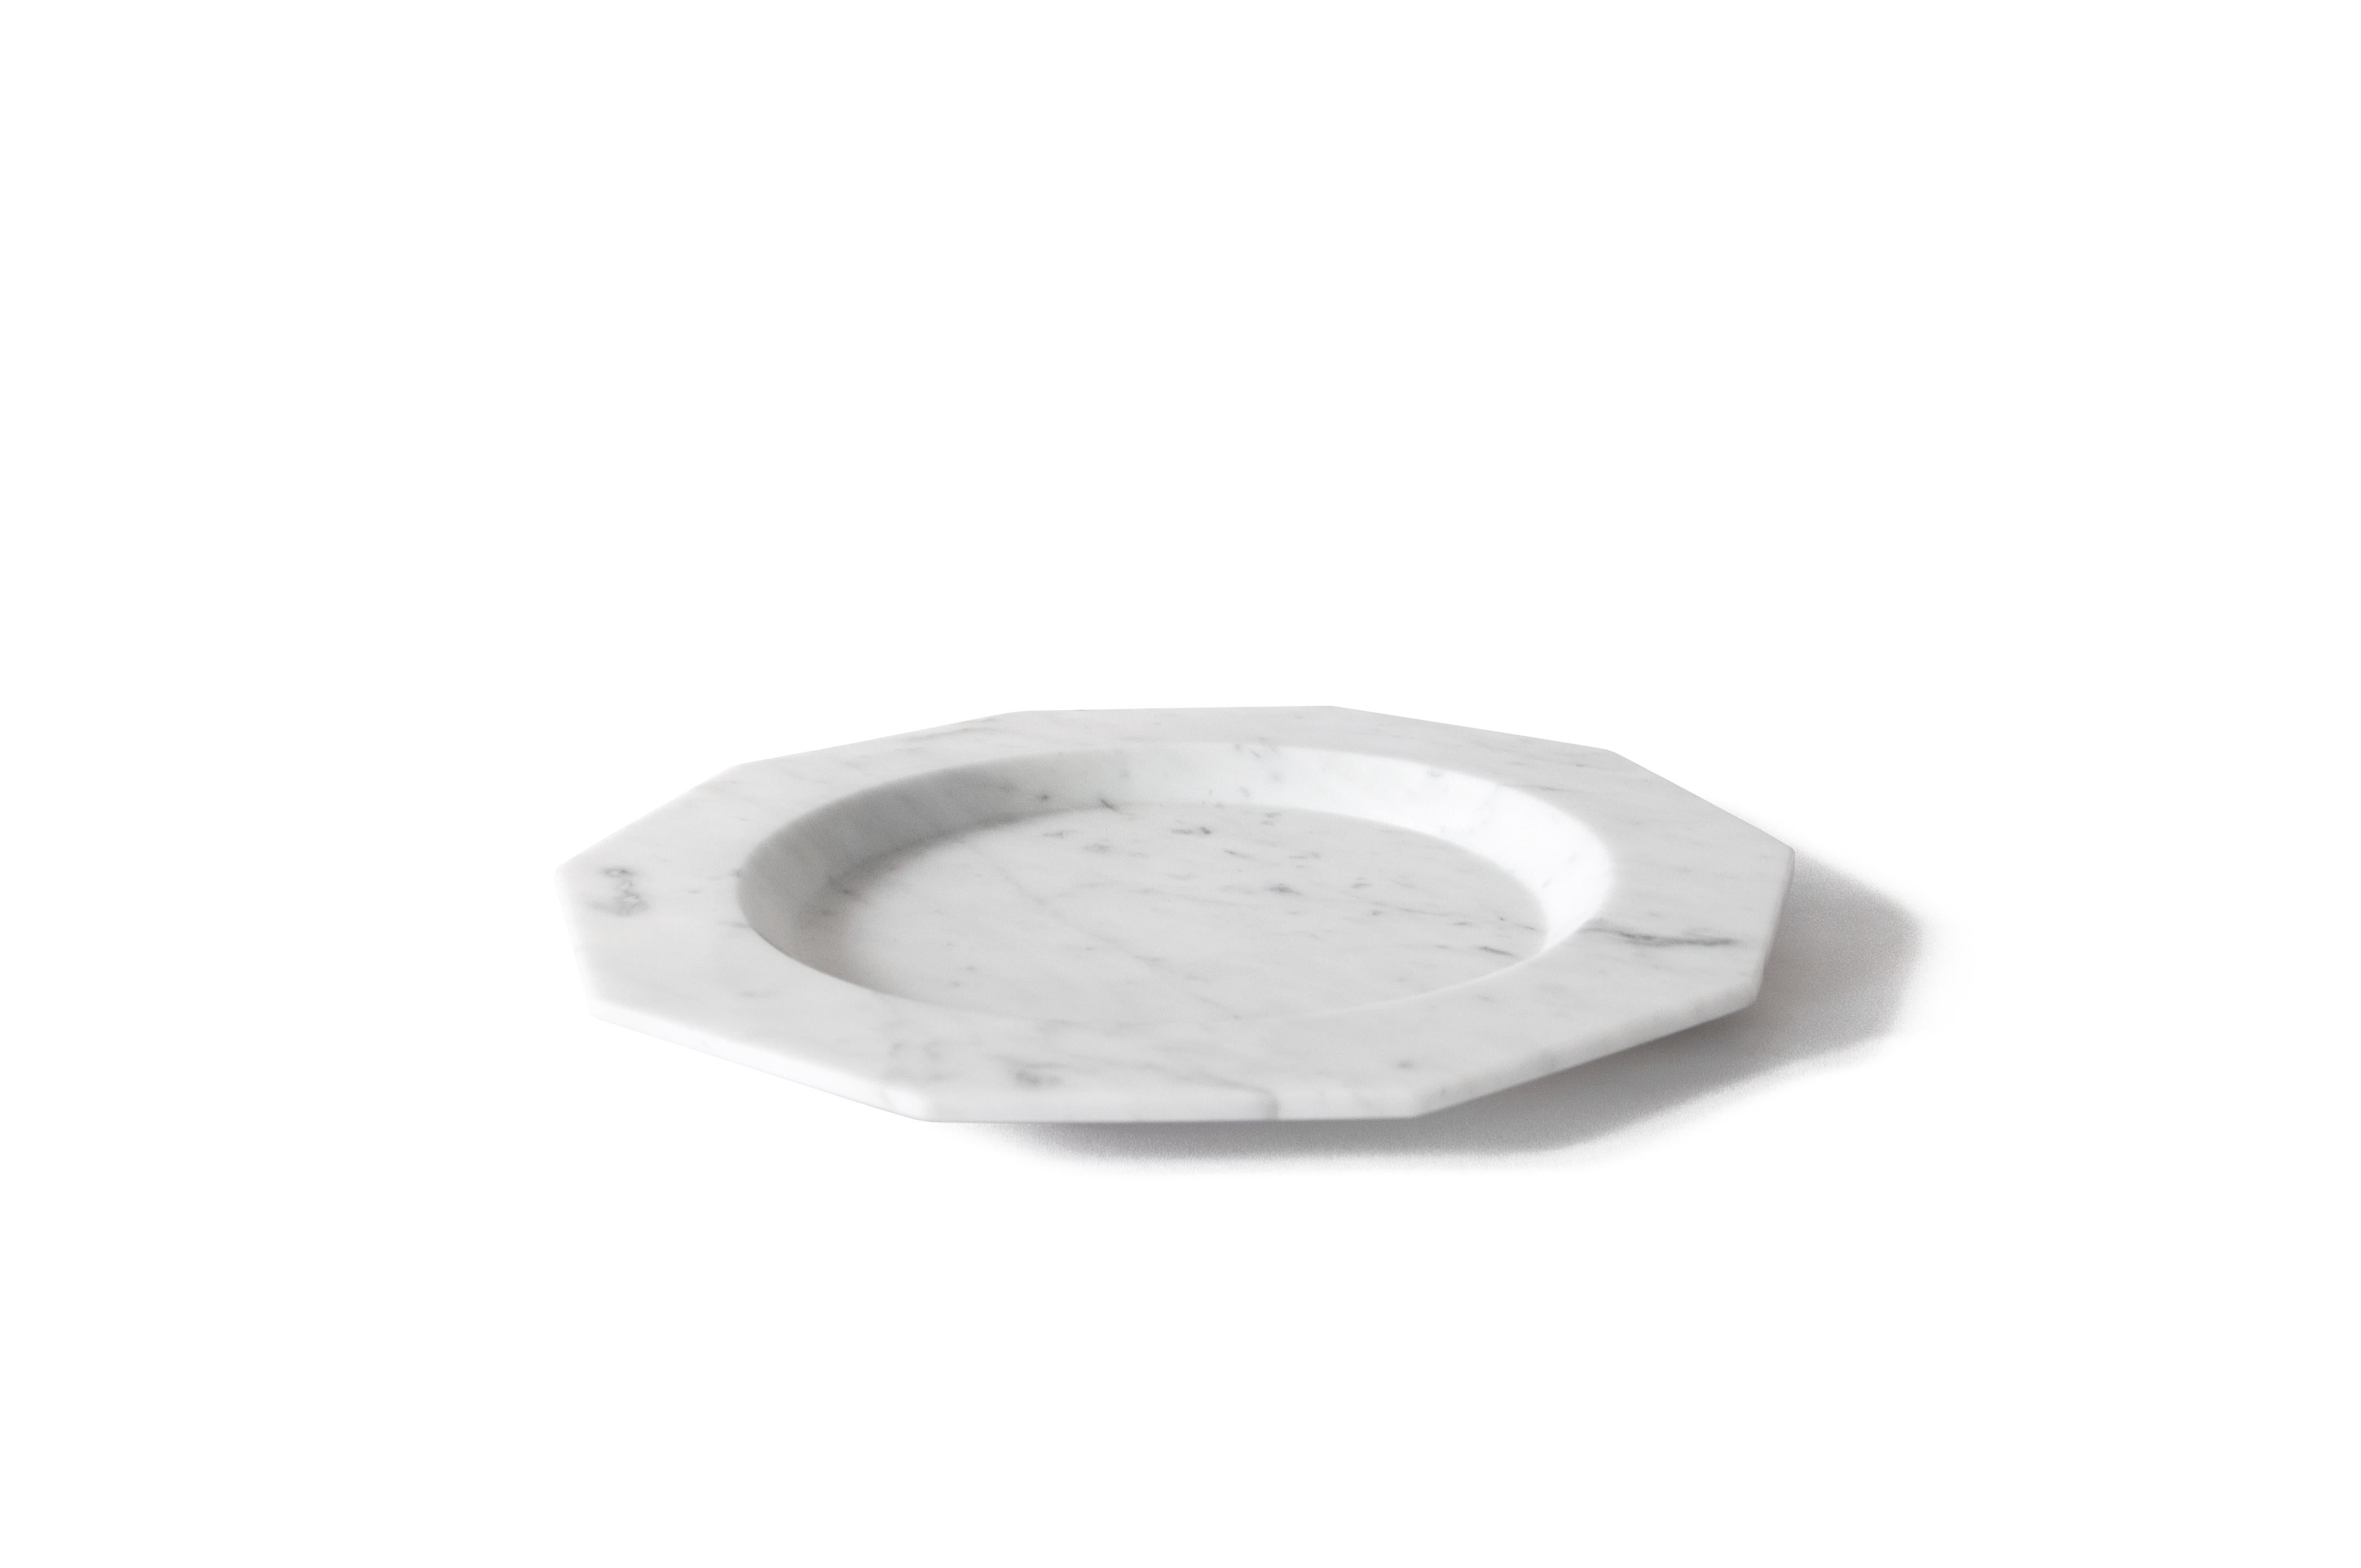 Dinner plate in satin white Carrara marble.

Available also in black Marquina or red Levanto and white Carrara marble.

Each piece is in a way unique (every marble block is different in veins and shades) and handmade by Italian artisans